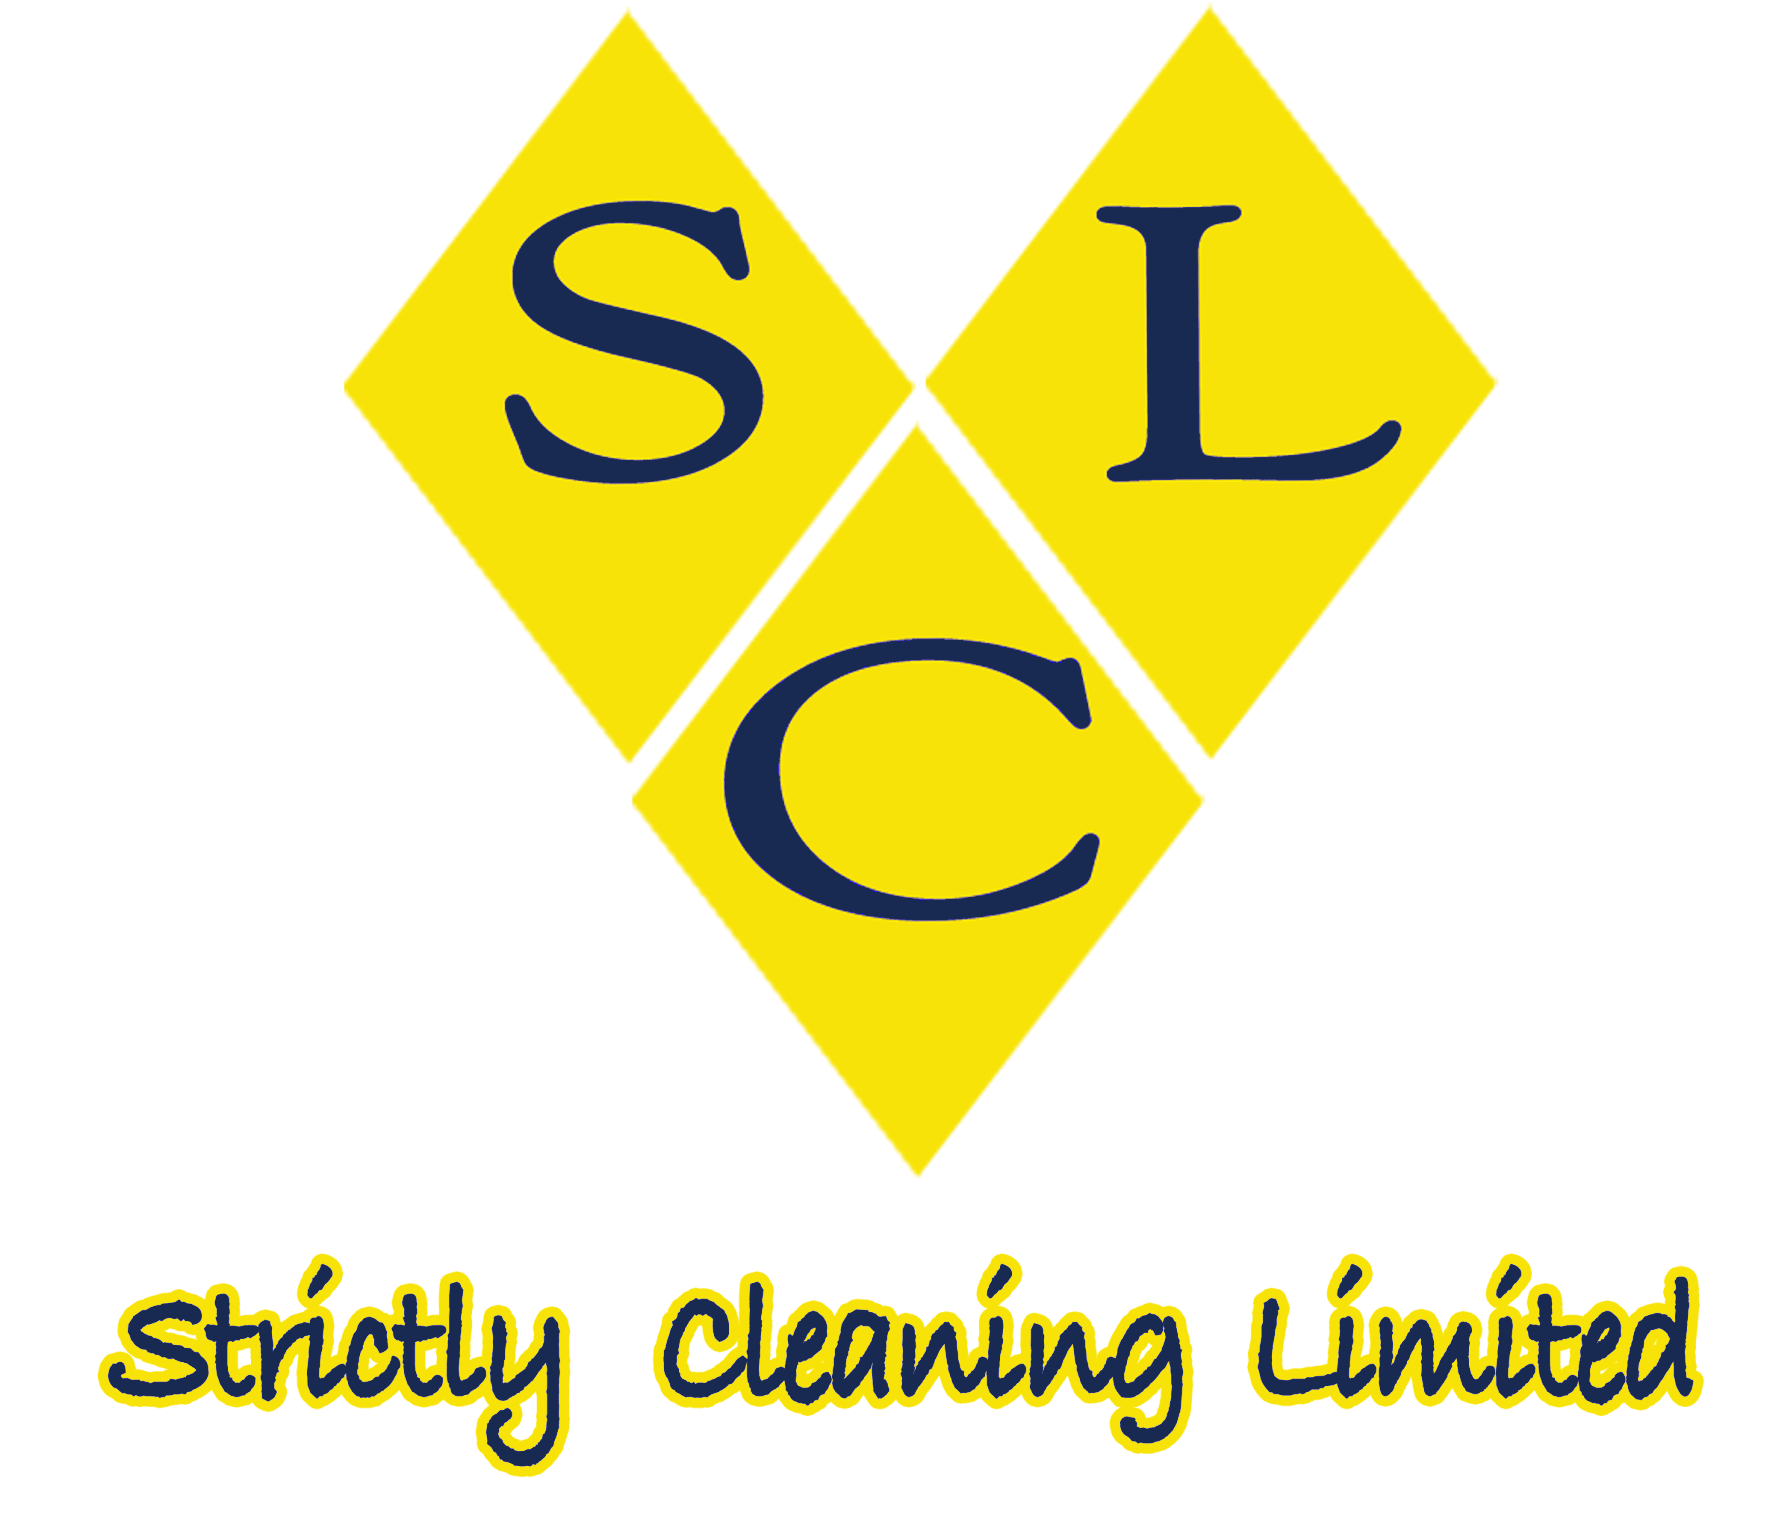 Cleaning services in High Wycombe | Strictly Cleaning Ltd